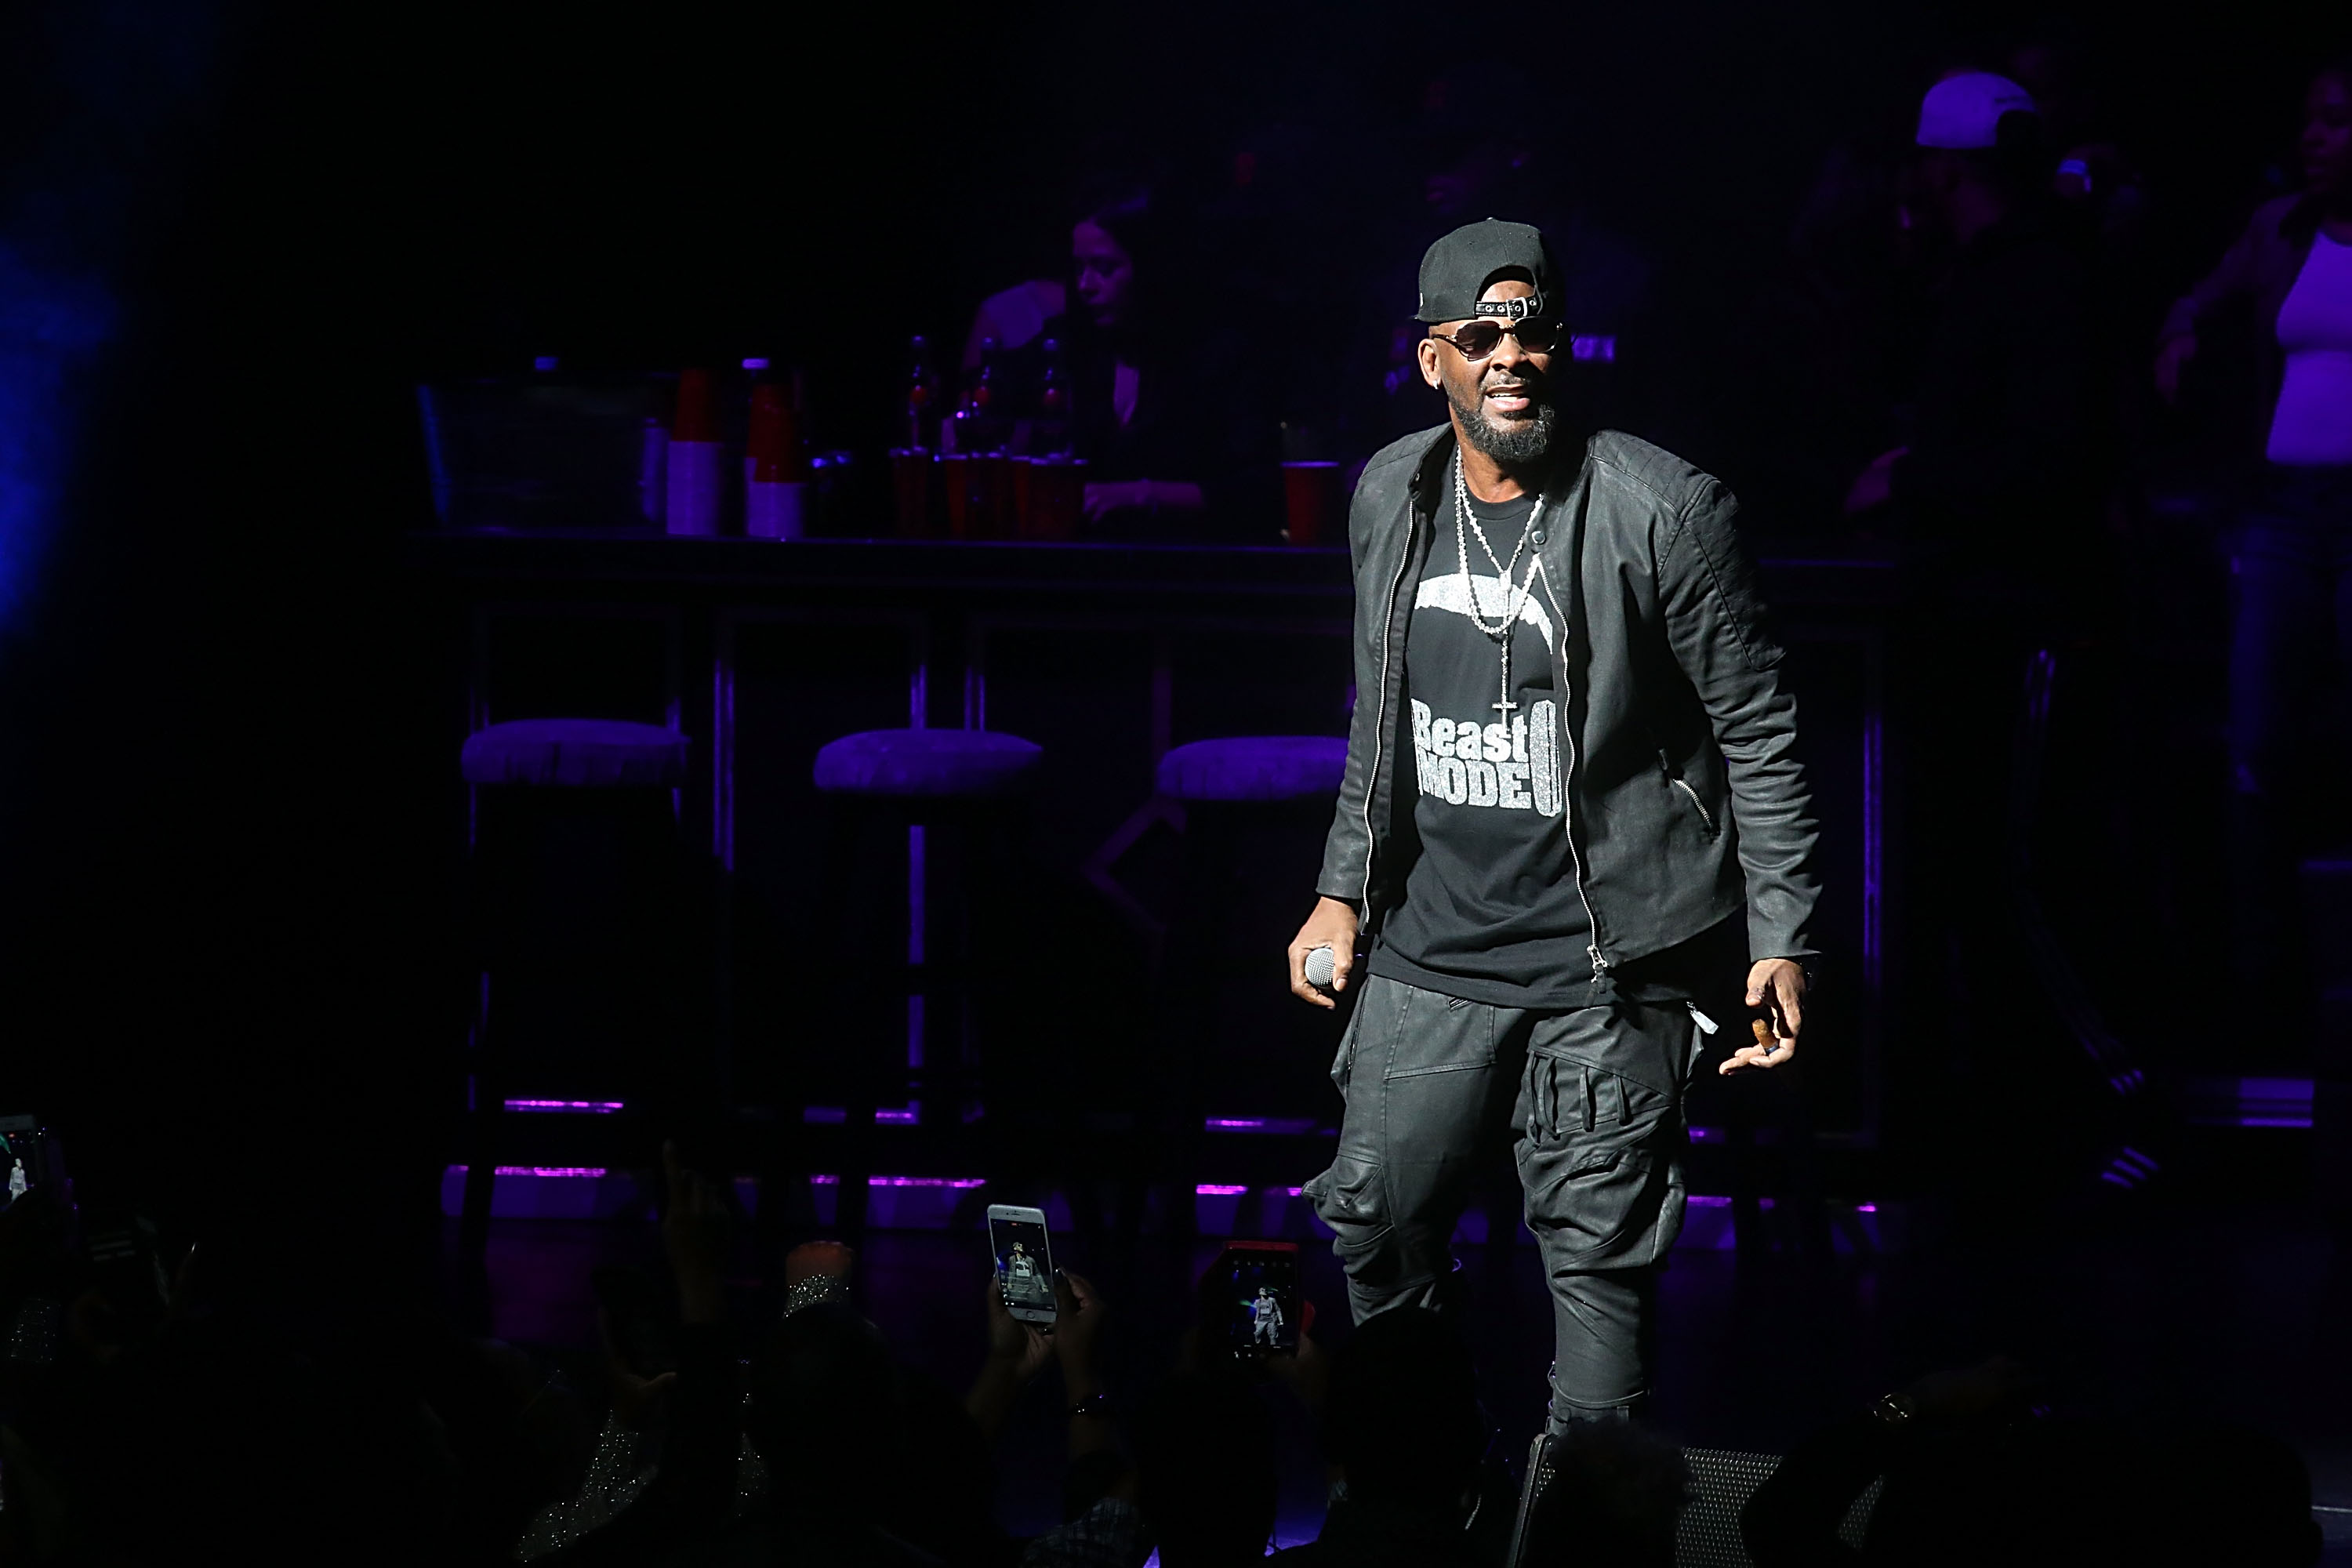 AUSTIN, TEXAS - MARCH 03: R. Kelly performs in concert at The Bass Concert Hall on March 3, 2017 in Austin, Texas. (Photo by Gary Miller/Getty Images) (Gary Miller—Getty Images)